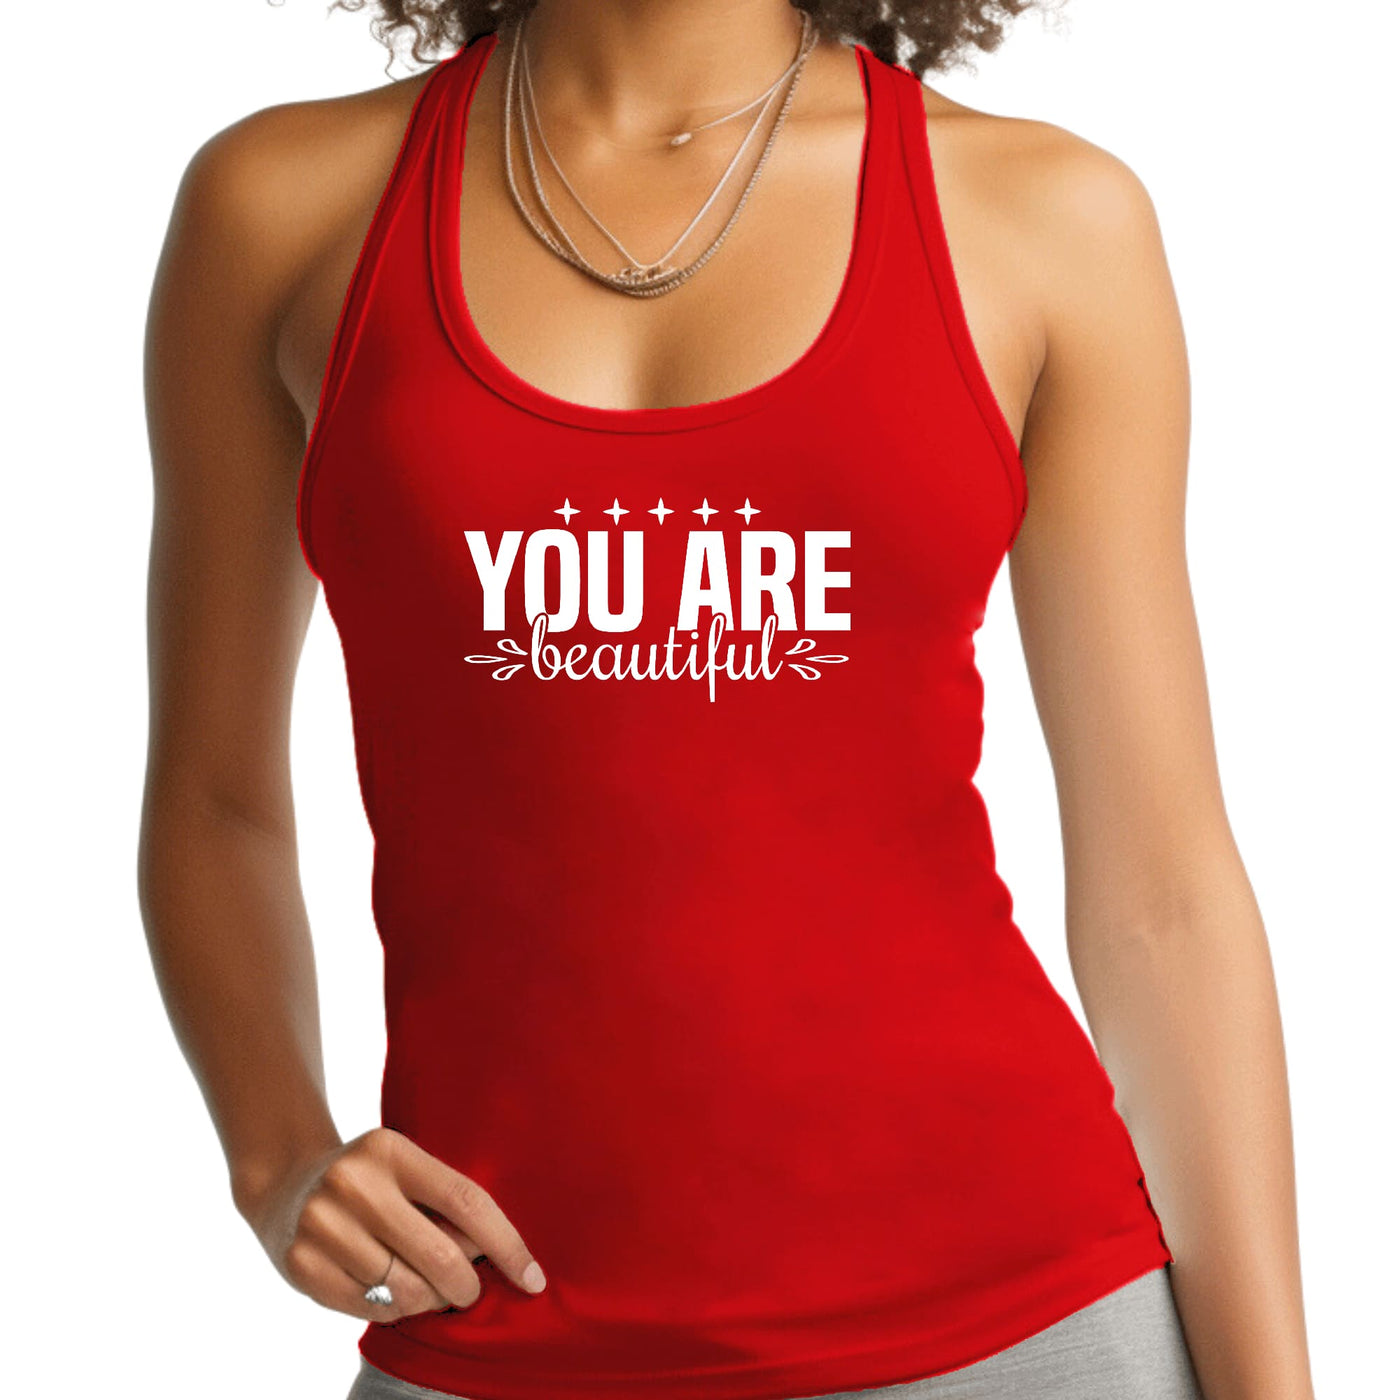 Womens Fitness Tank Top Graphic T-shirt You Are Beautiful Inspiration - Womens